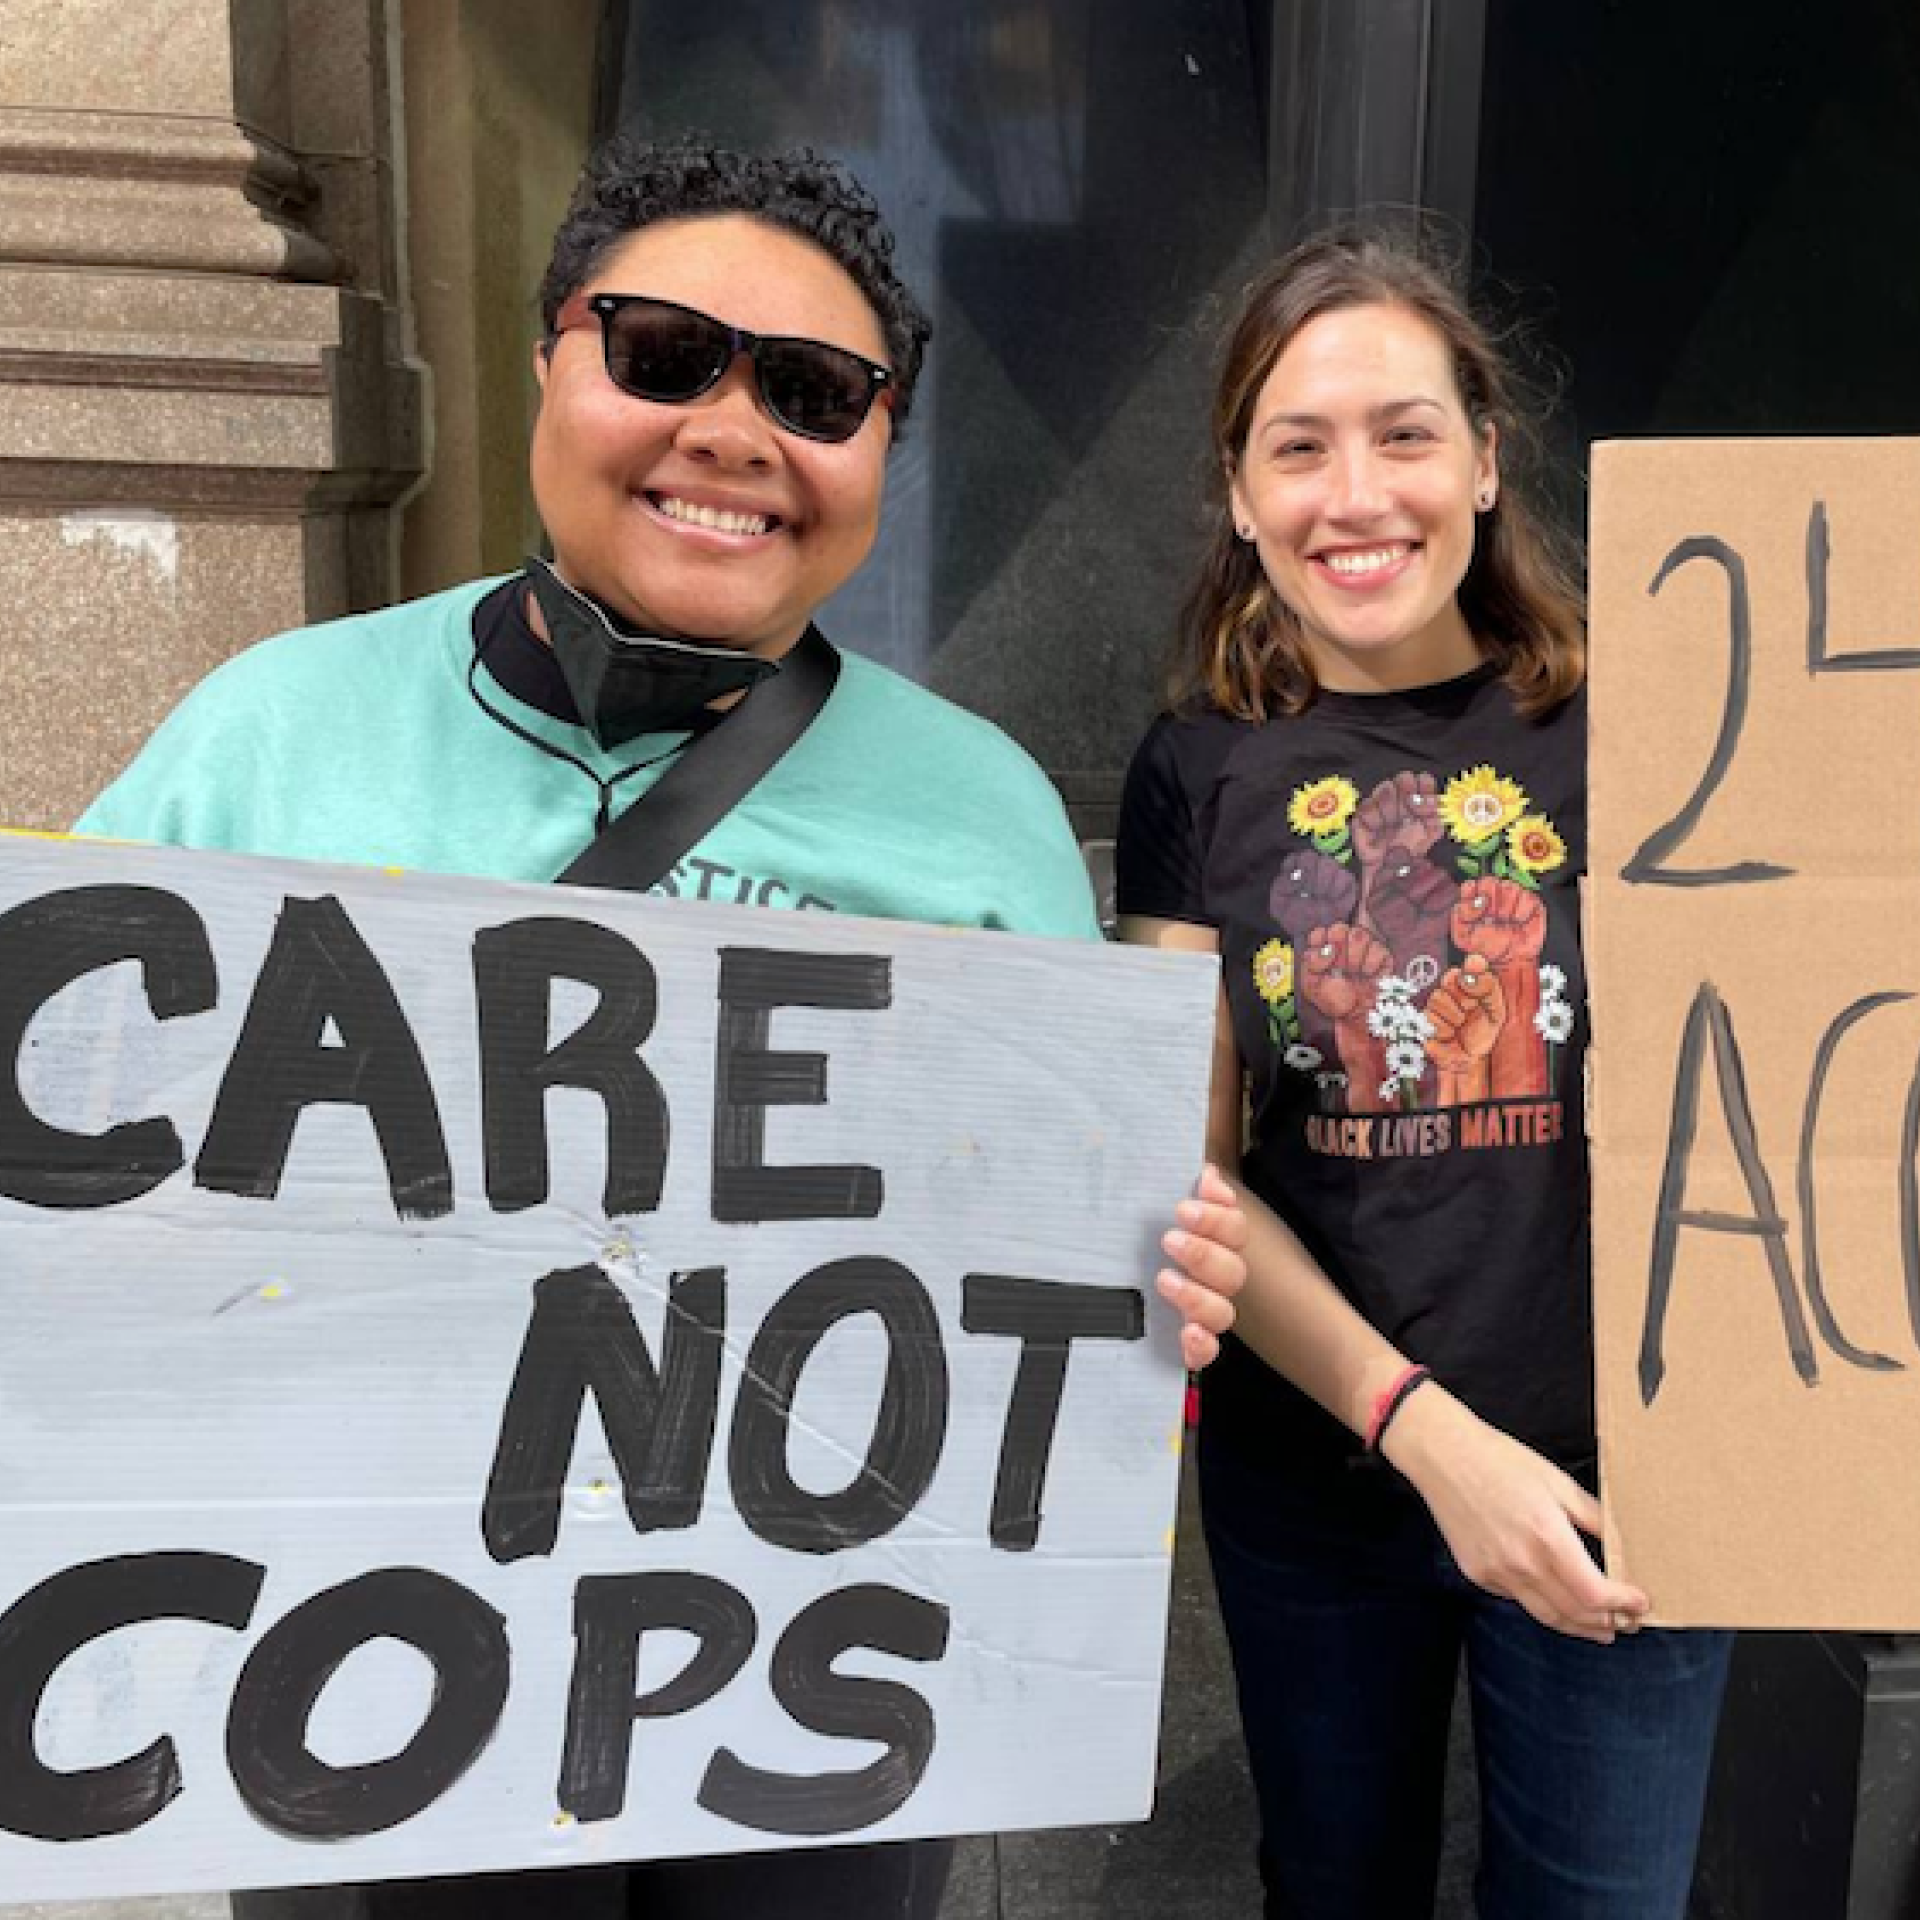 Kris Henderson wears sunglasses and stands next to Nomi Teusch. They are holding signs that say 'Care Not Cops' and '24/7 Access'